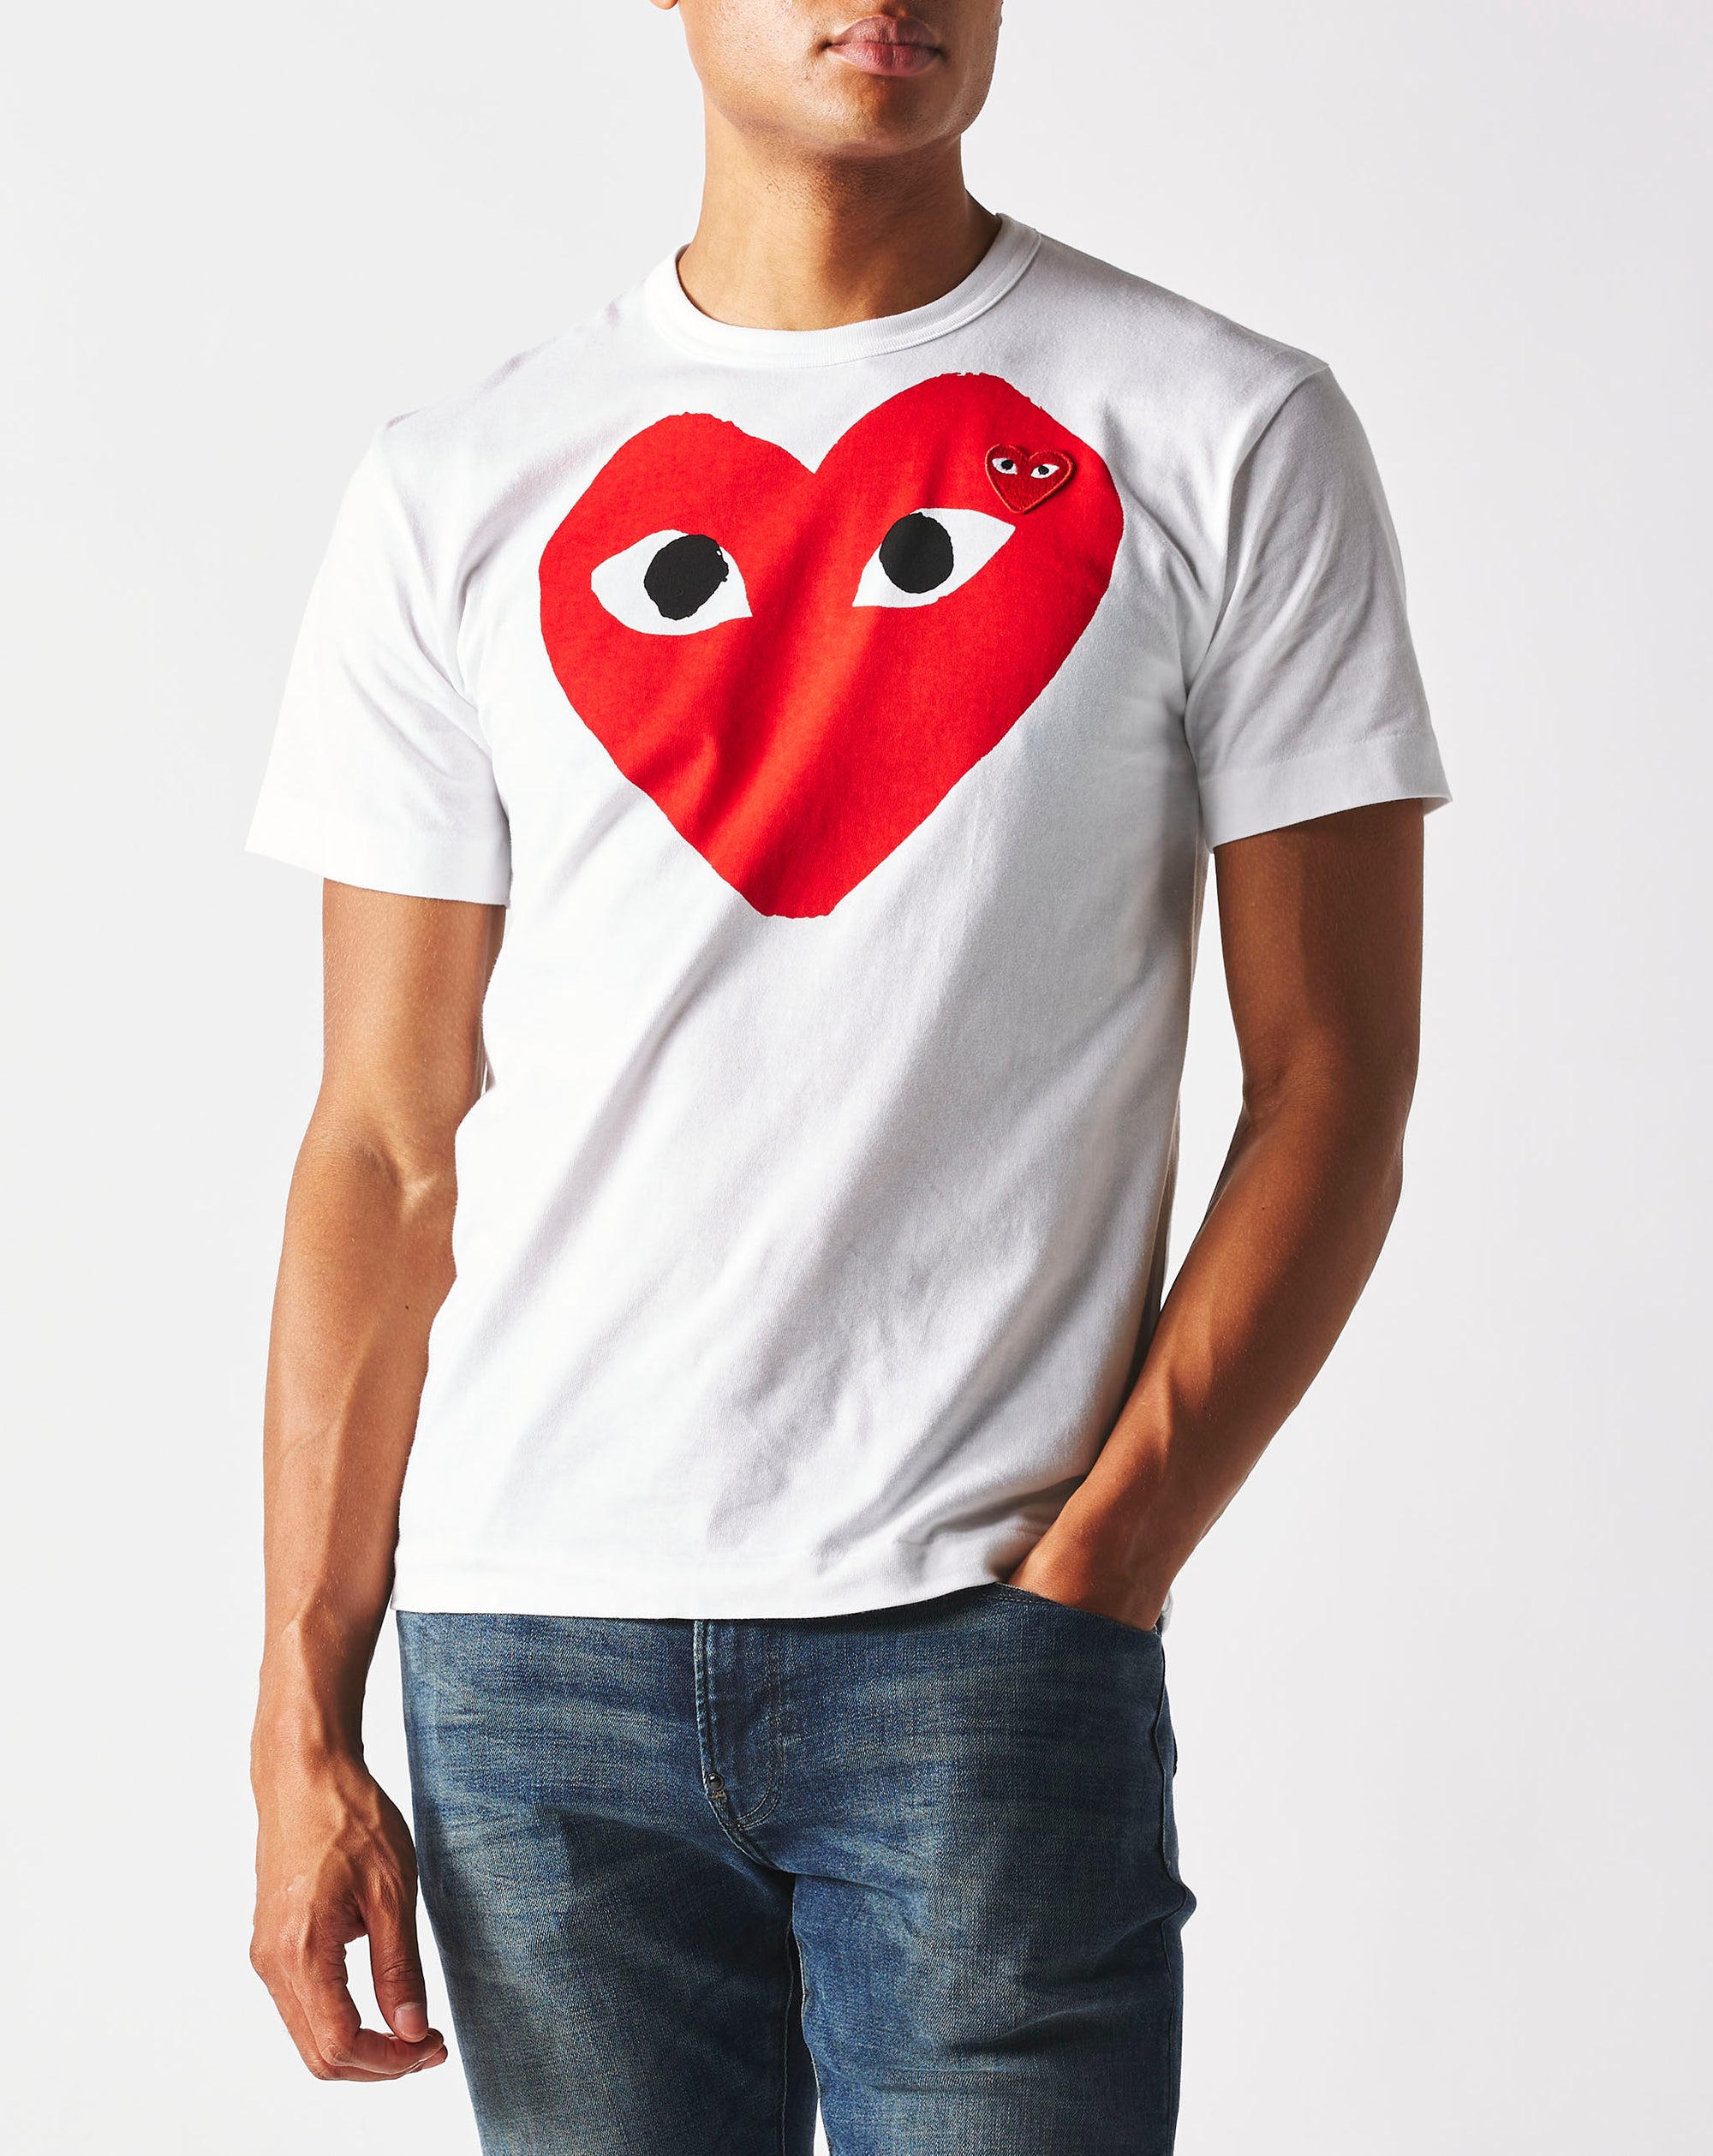 Comme des Garcons PLAY Big Red Heart T-Shirt - Rule of Next Apparel